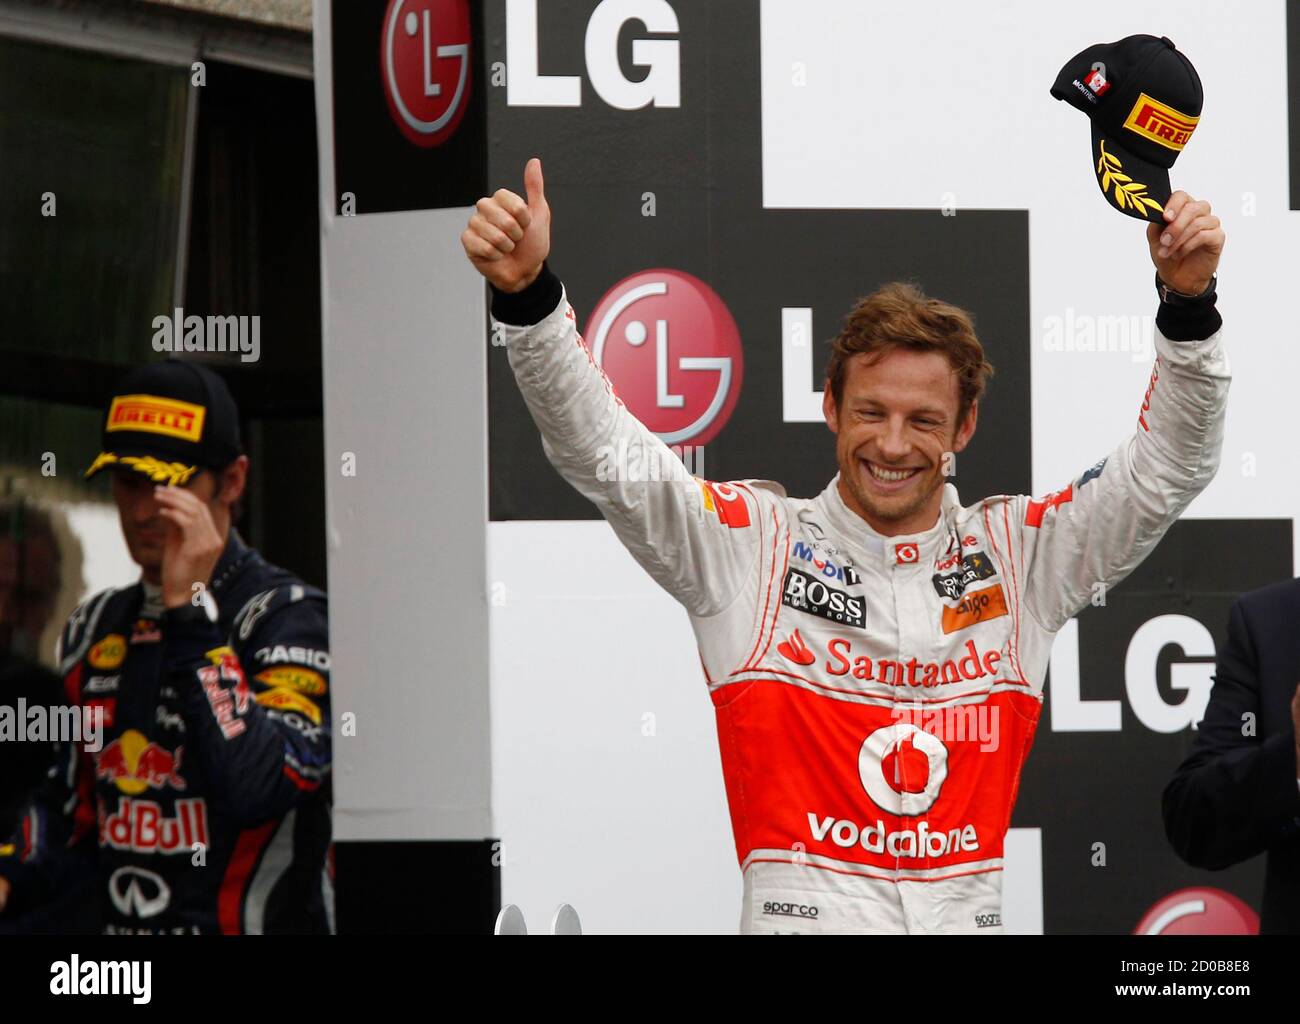 McLaren Formula One driver Jenson Button of Britain celebrates winning the Canadian F1 on the podium during the Grand Prix at the Circuit Gilles Villeneuve in Montreal June 12, 2011.   REUTERS/Chris Wattie (CANADA  - Tags: SPORT MOTOR RACING) Stock Photo